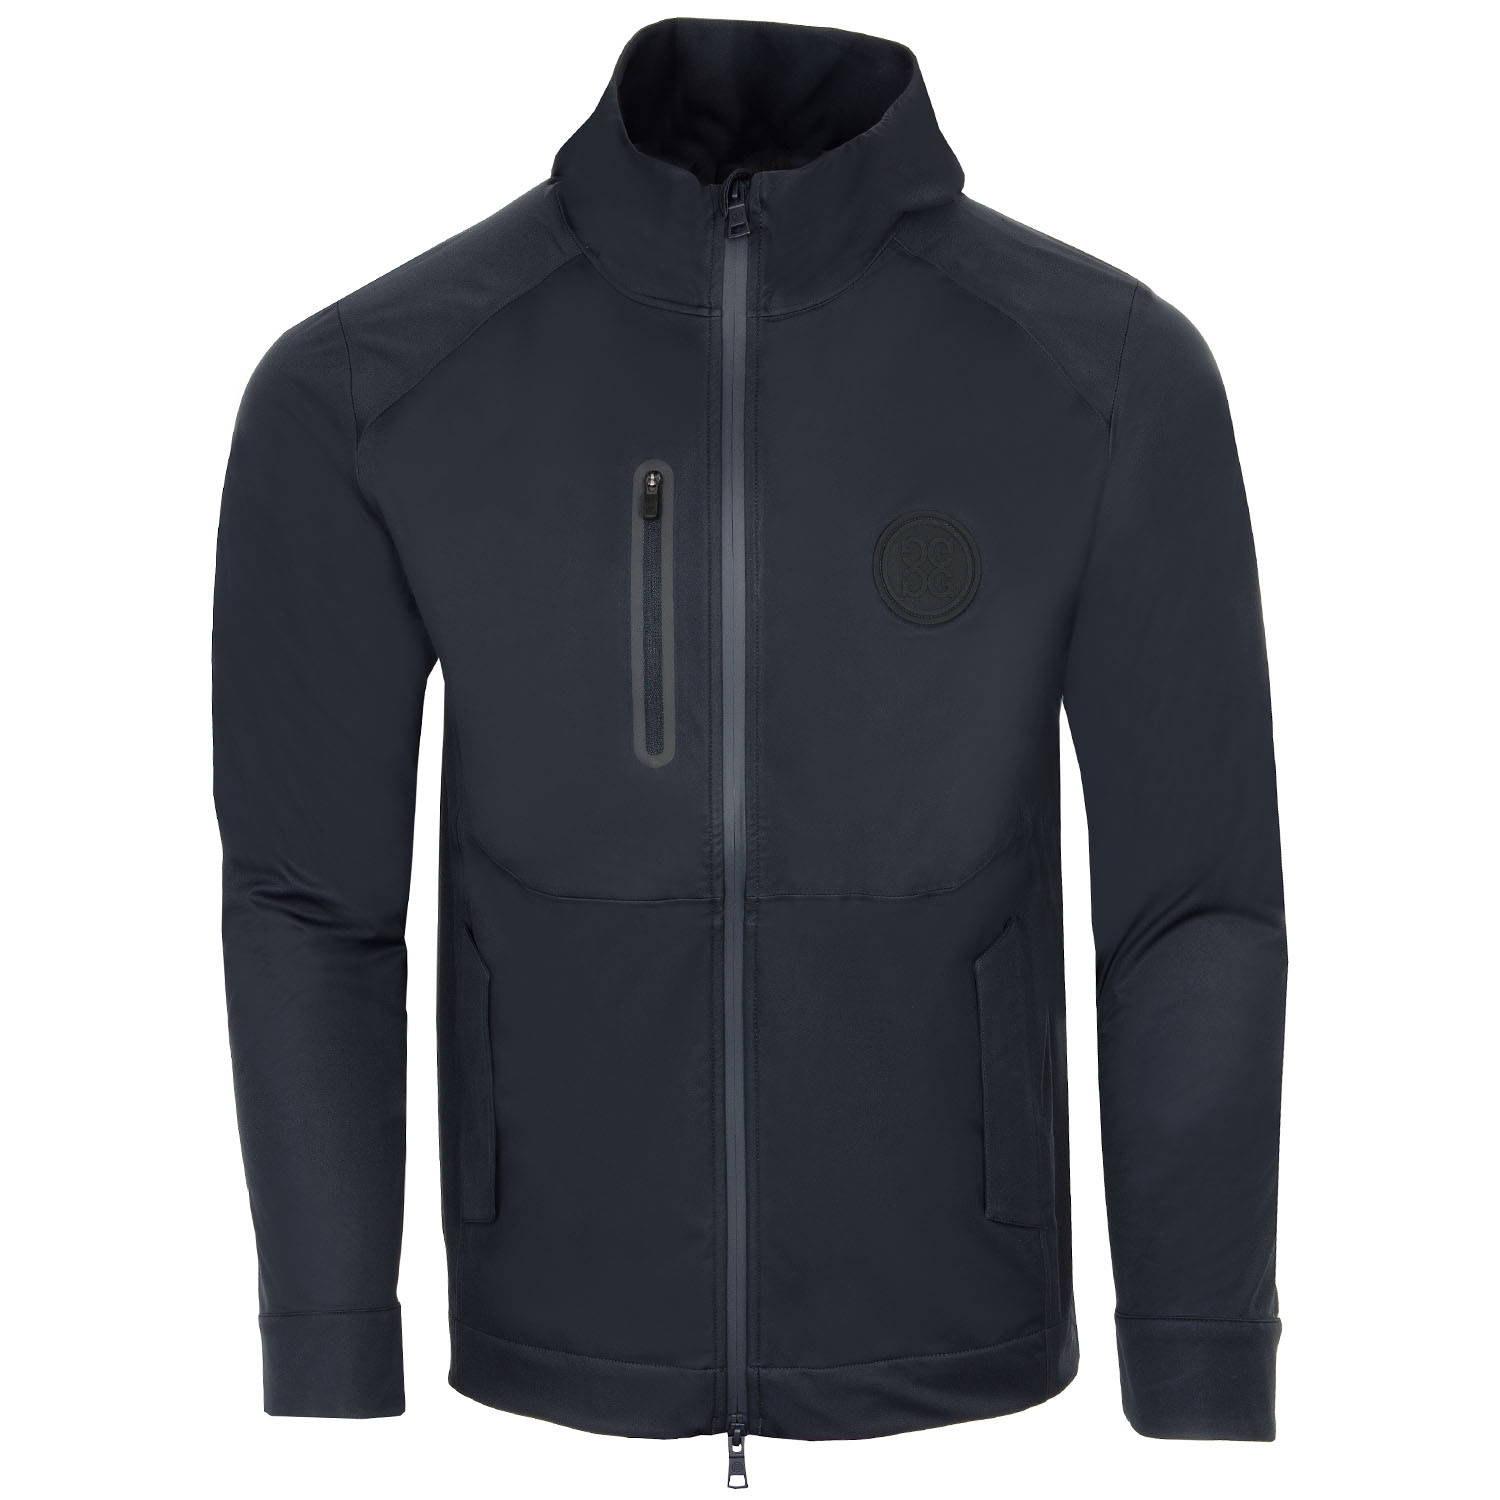 G/FORE Weather Resistant Repeller Jacket